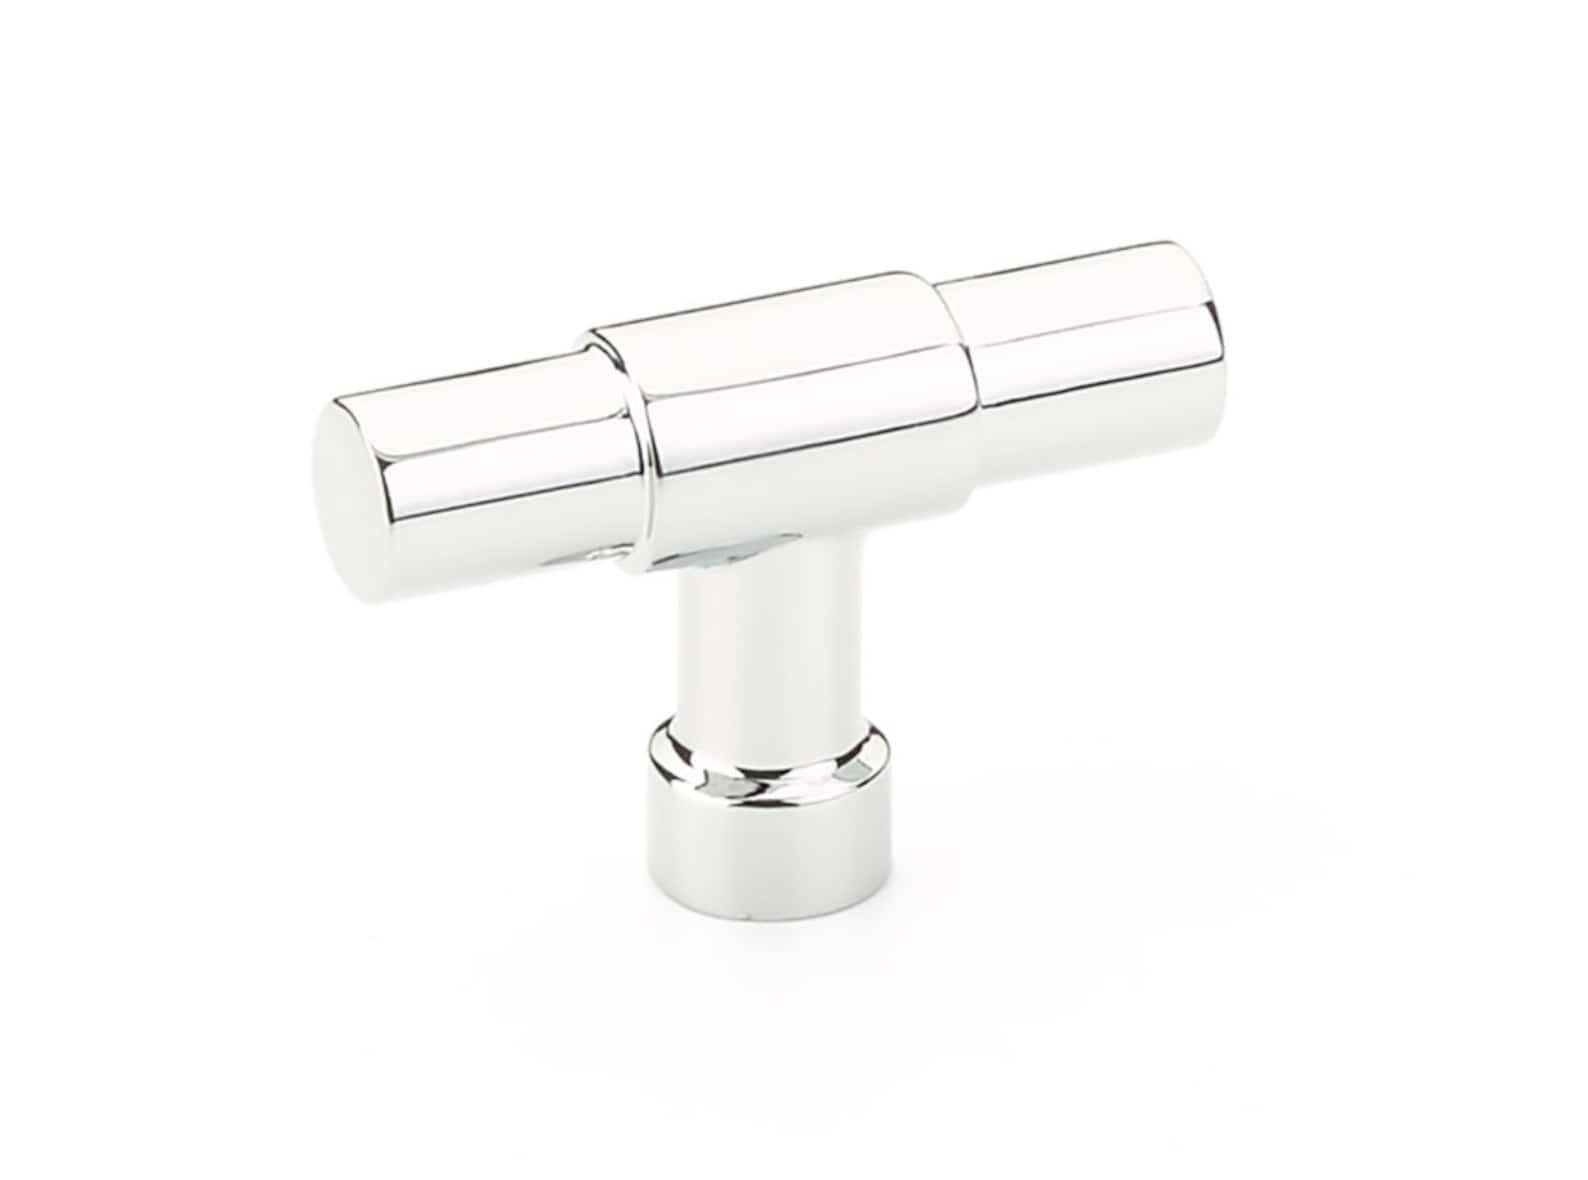 Polished Chrome "Industry" Cabinet Knobs and Drawer Pulls - Industry Hardware